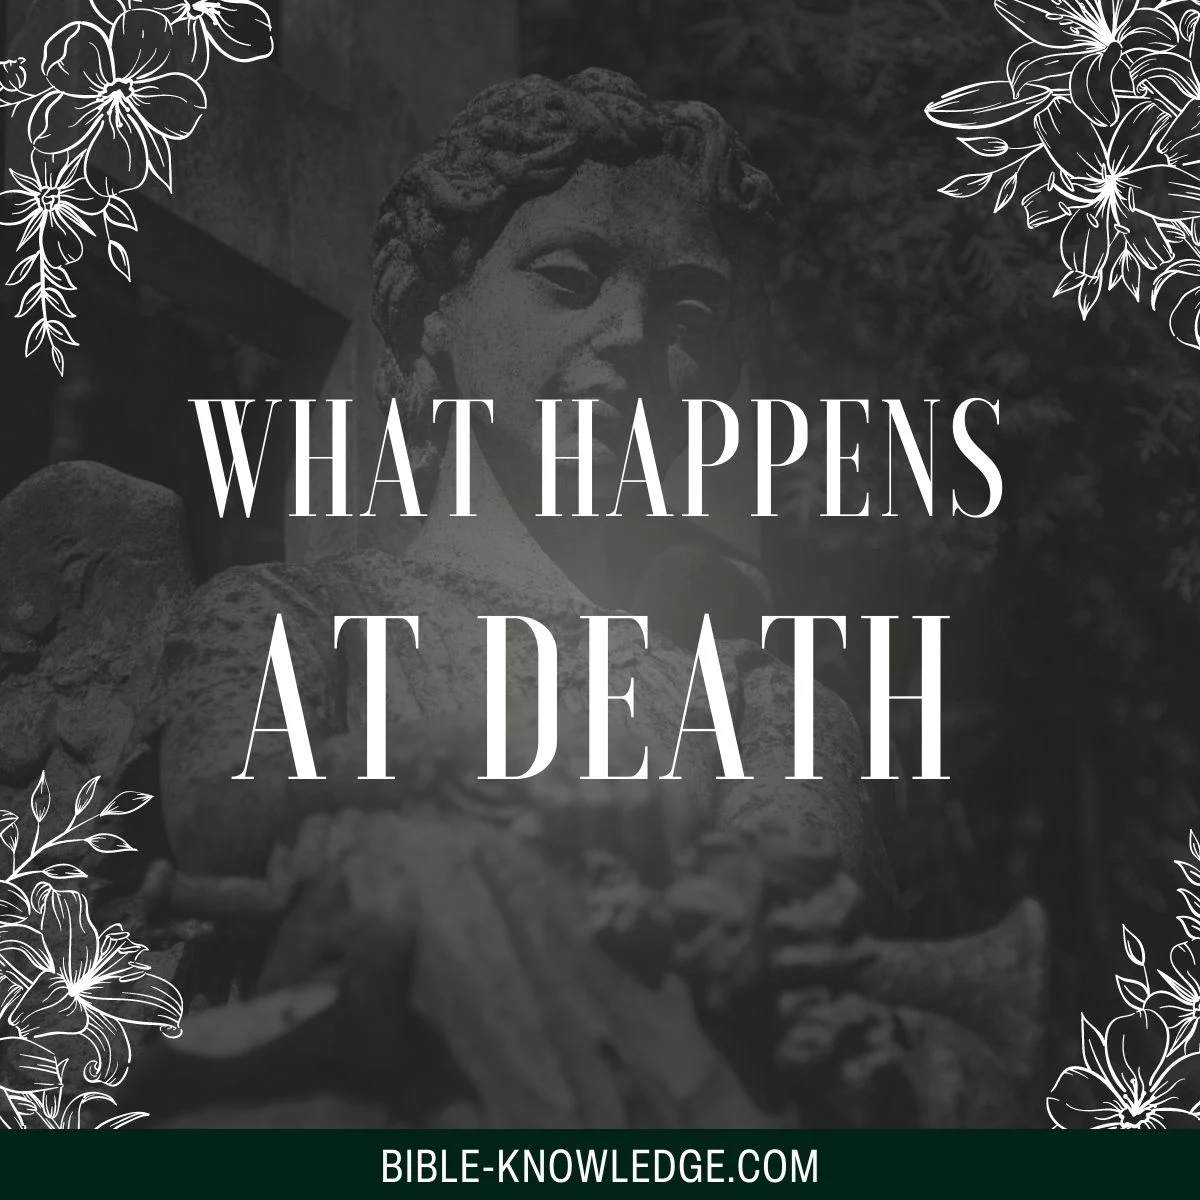 What Happens at Death